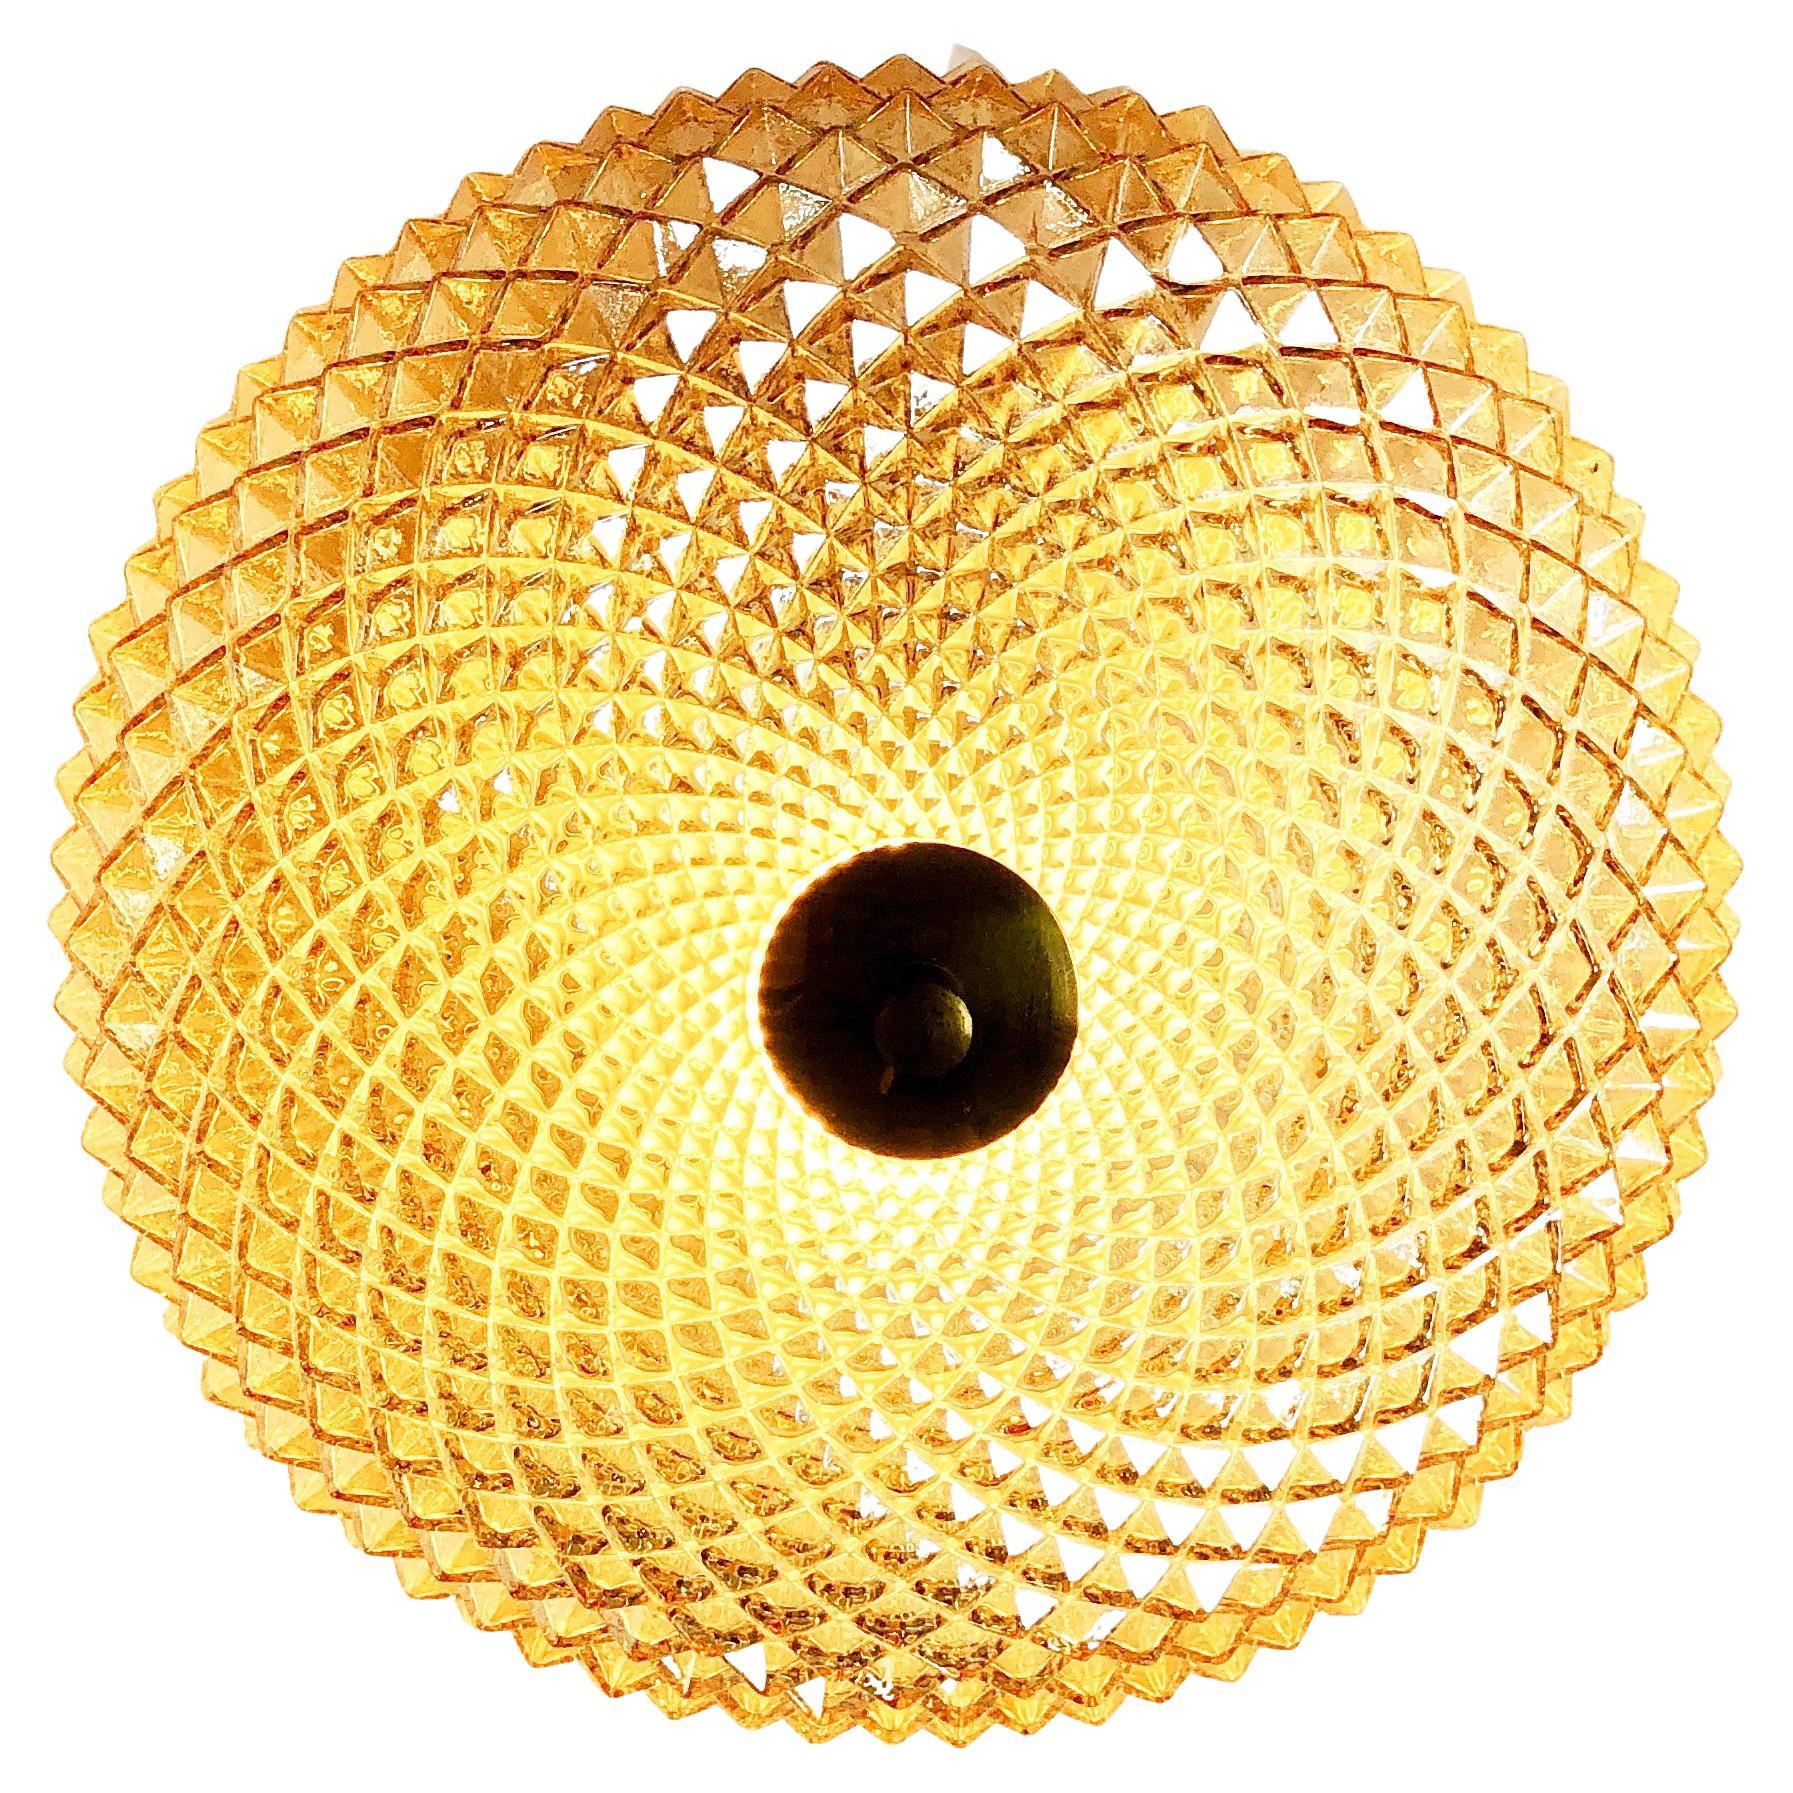 Magnificent, flush base ceiling lamp by 'RZB Leuchten', one of Germany's famous mid century manufacturer of high-end design lighting.
Comes in a round shape, spiky like a Mexica cacti: made from transparent glas: gold shimmering with a kind of soap